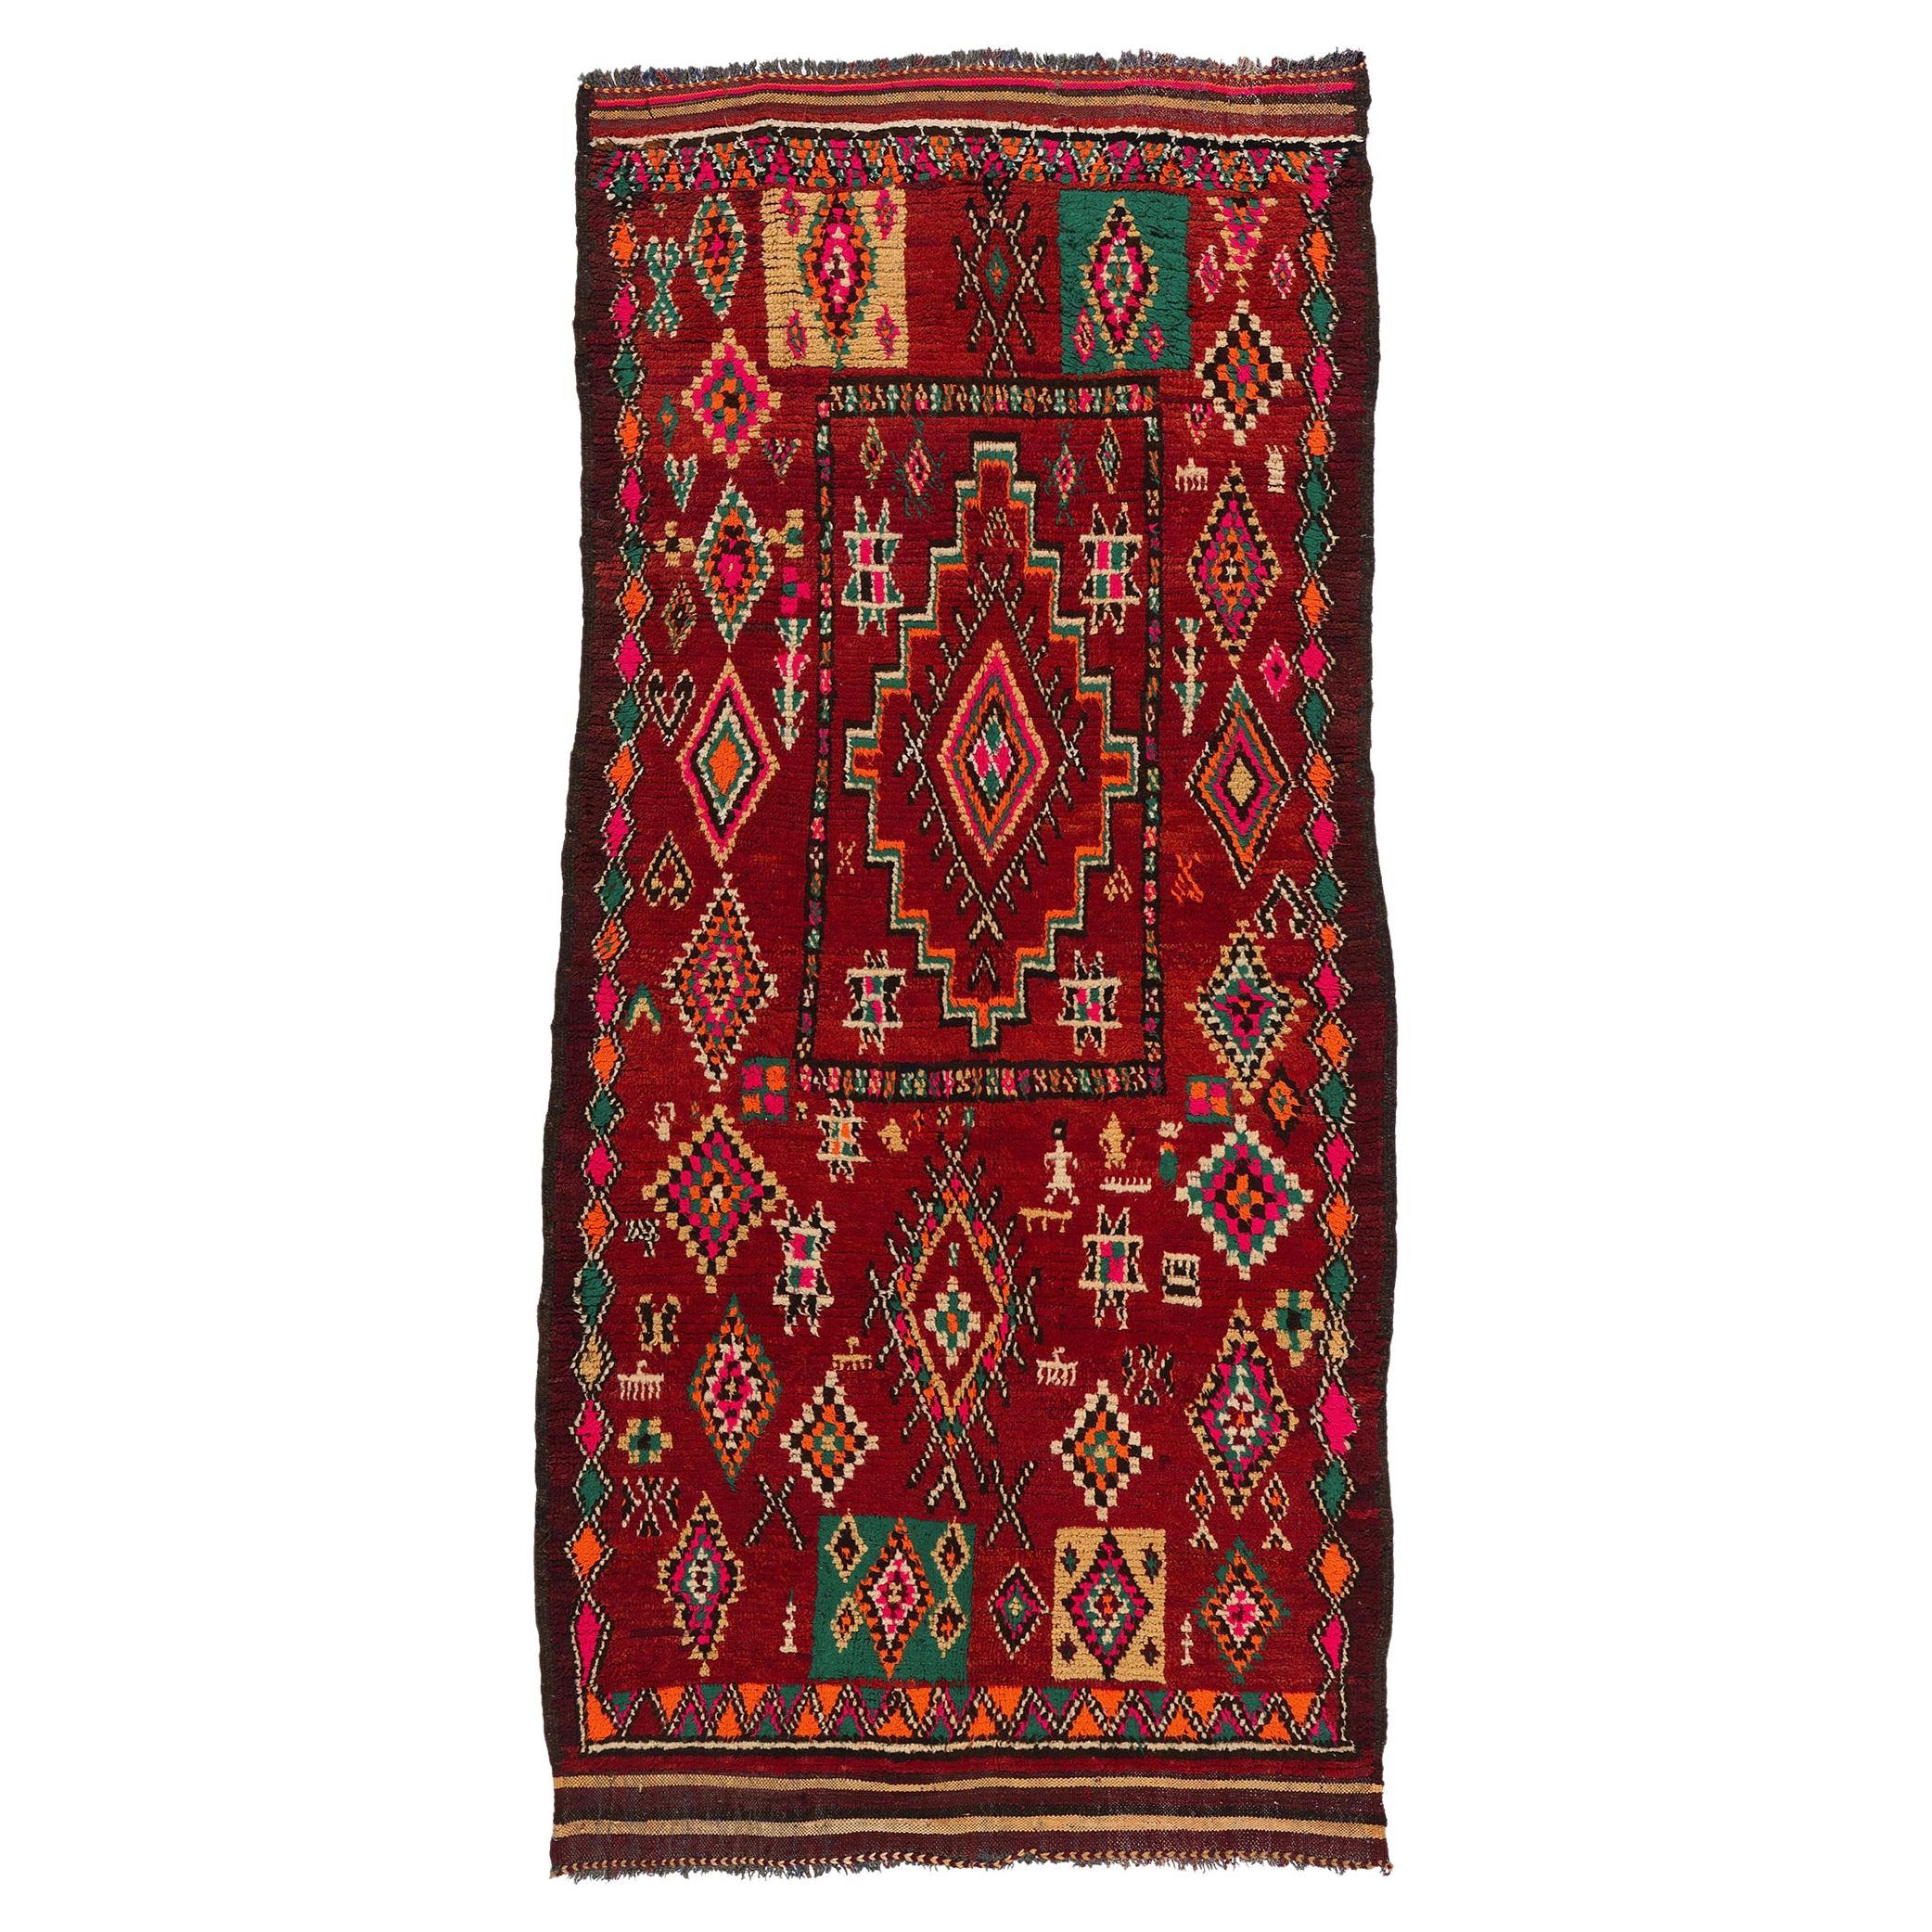  Vintage Red Taznakht Moroccan Rug, Tribal Enchantment Meets Cozy Boho Chic